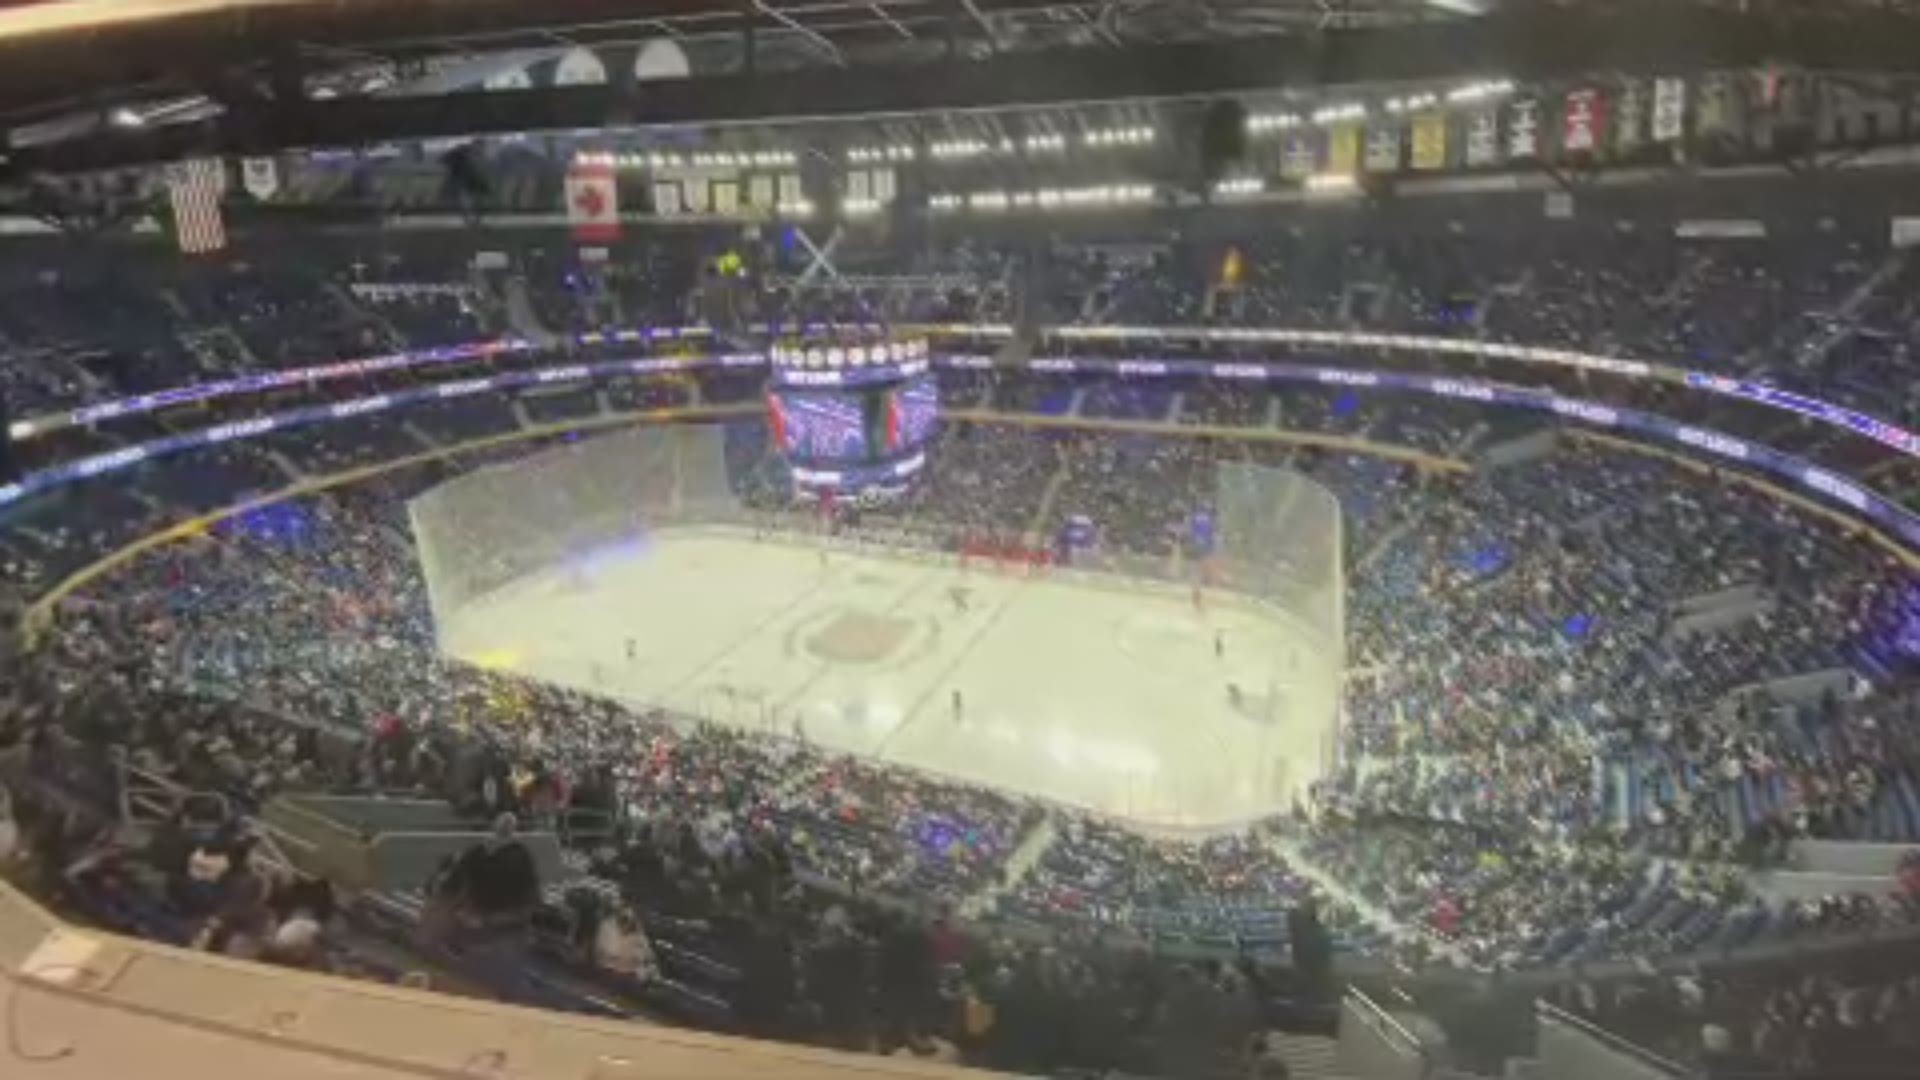 The empty seats continue to show at KeyBank Center, this time on Thursday as the Sabres lost to the Red Wings, 4-3 in a shootout.